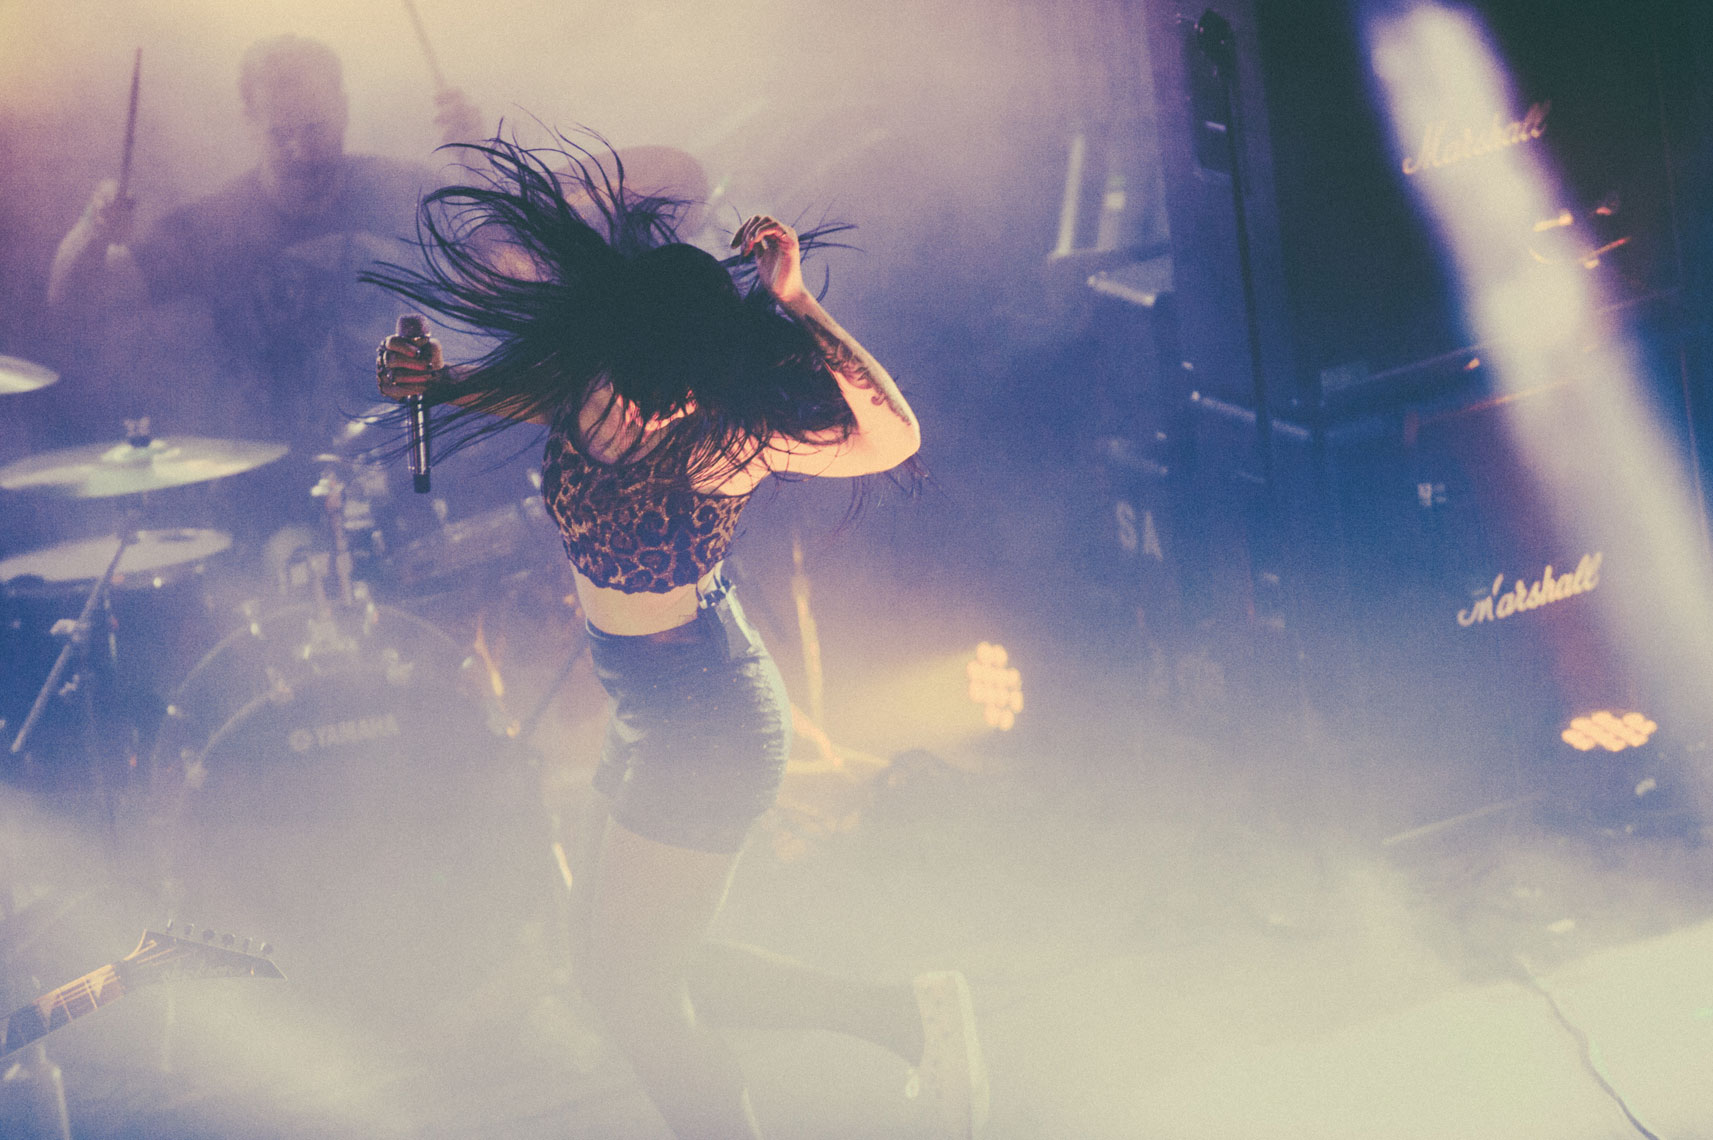 Sleigh-Bells-performs-at-The-Belmont-During-SXSW-2014-3